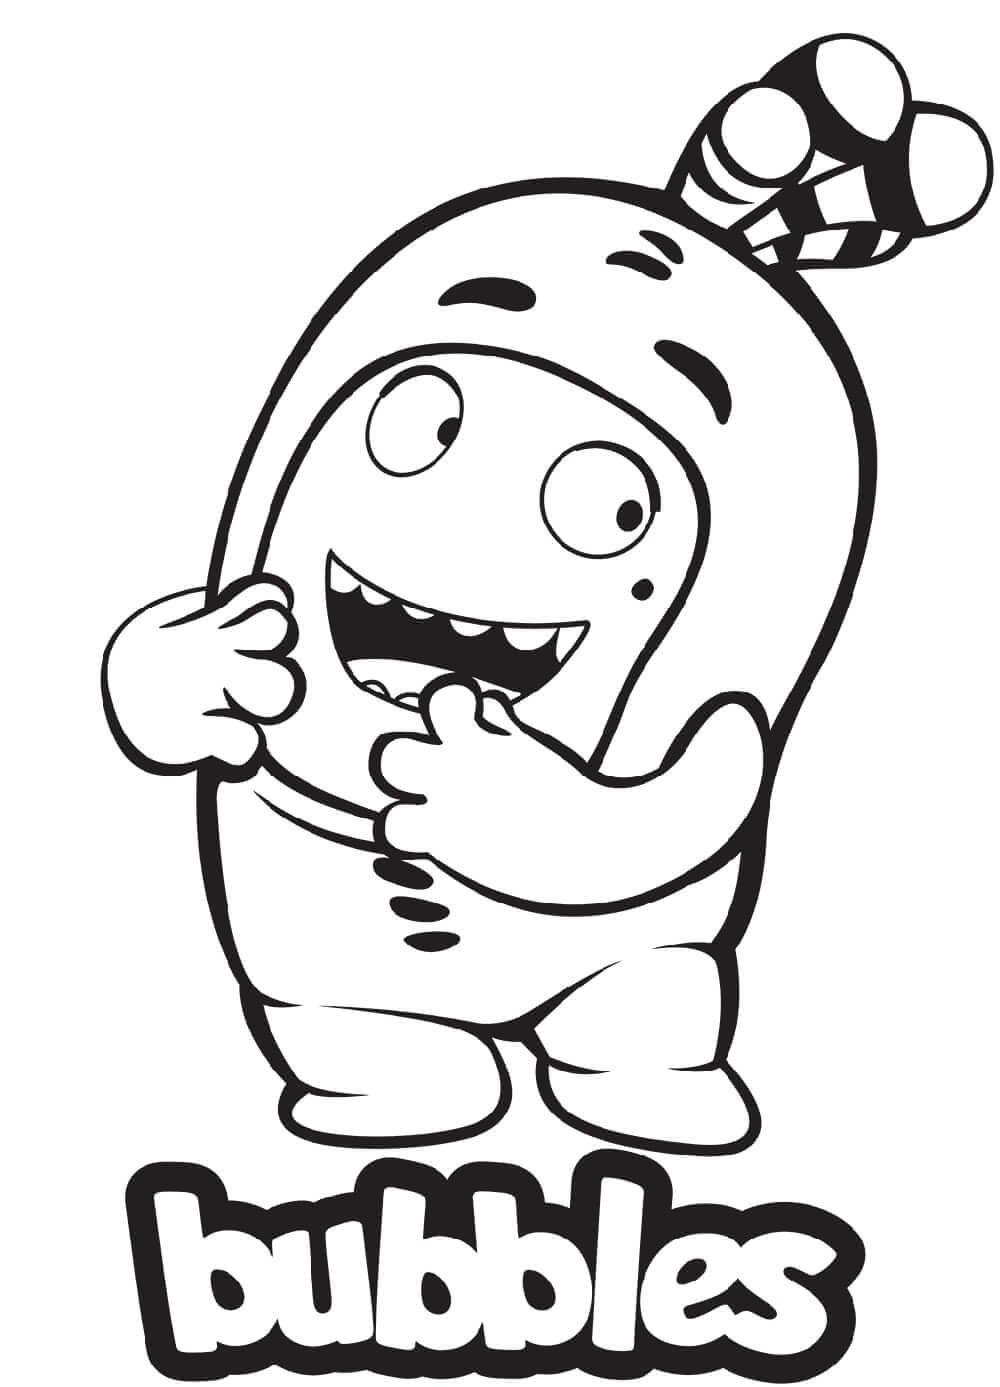 zee-oddbods-coloring-page-free-printable-coloring-pages-for-kids